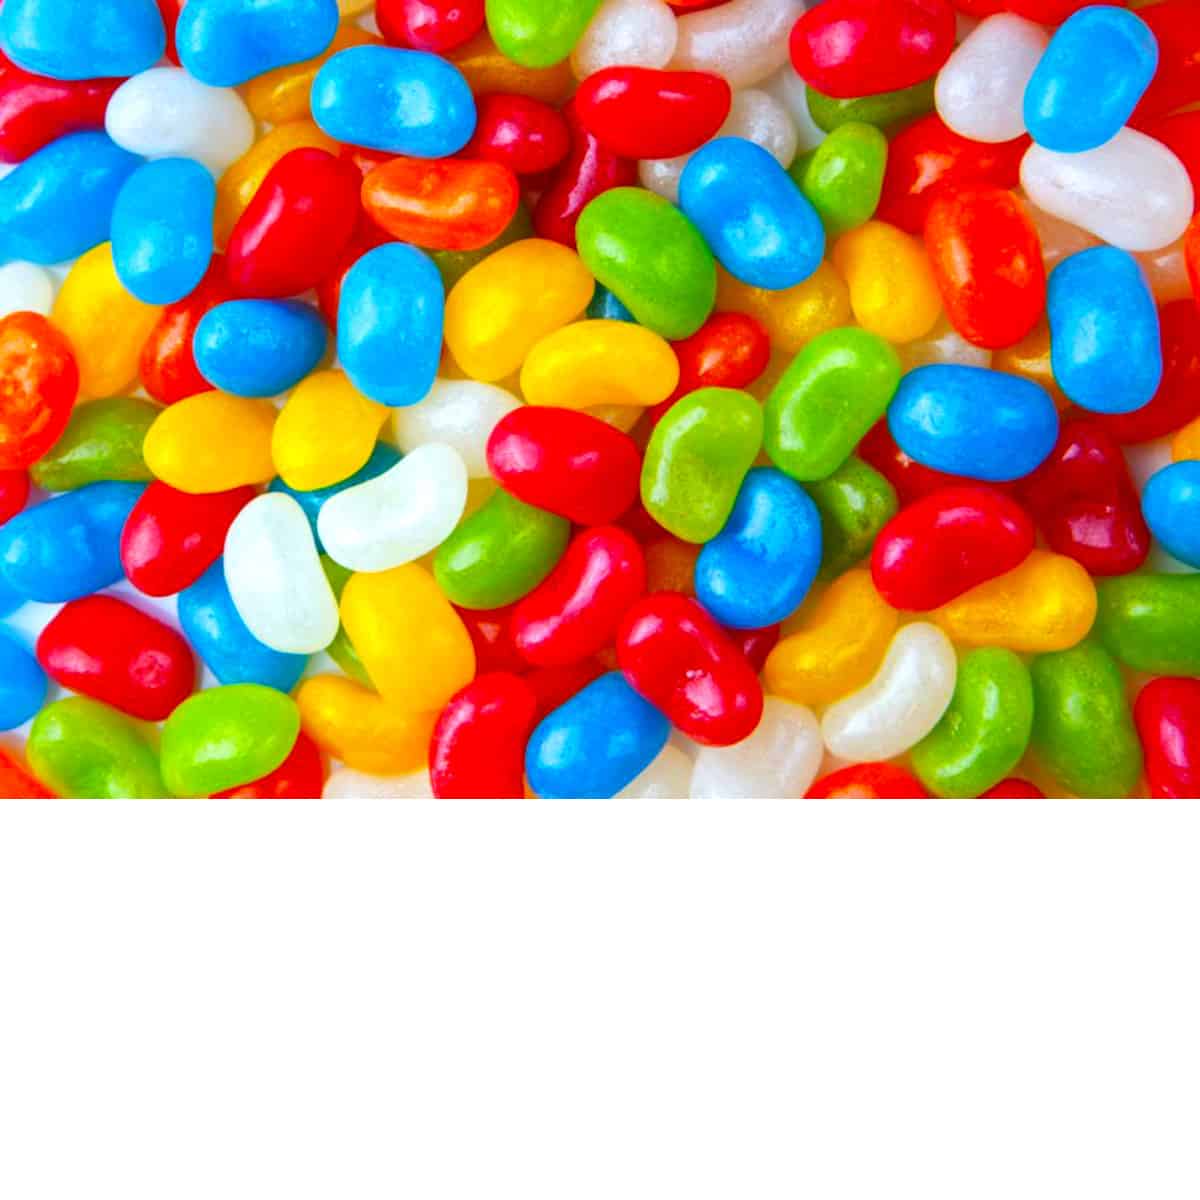 jelly bean candy processed with toxic ingredients including artificial dye and coloring